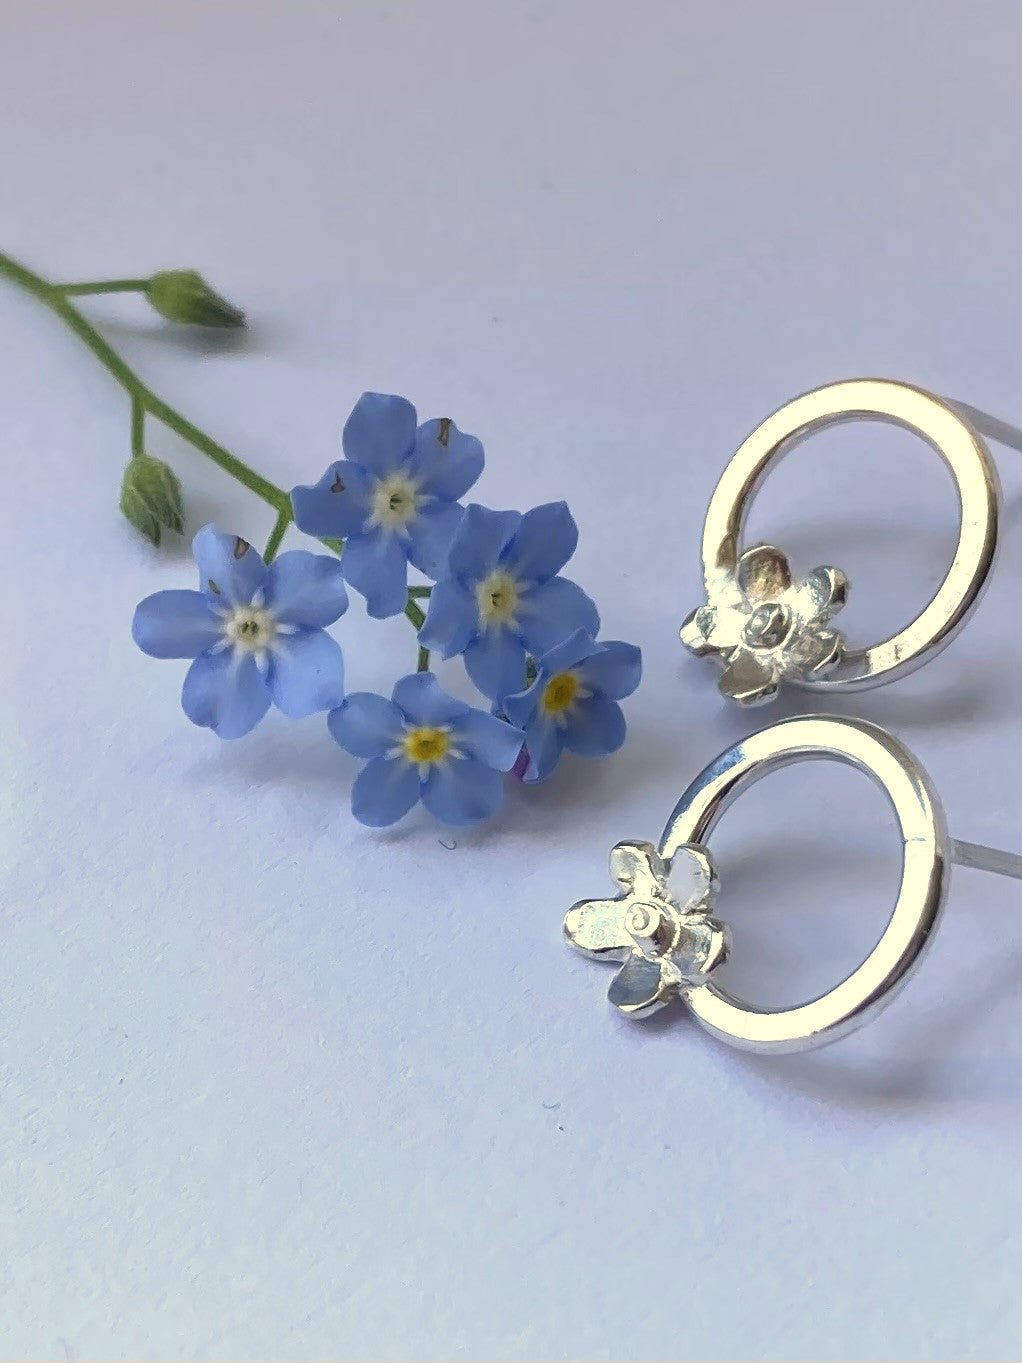 real blue forget-me-not flower sprig with  silver circle and flower stud earrings